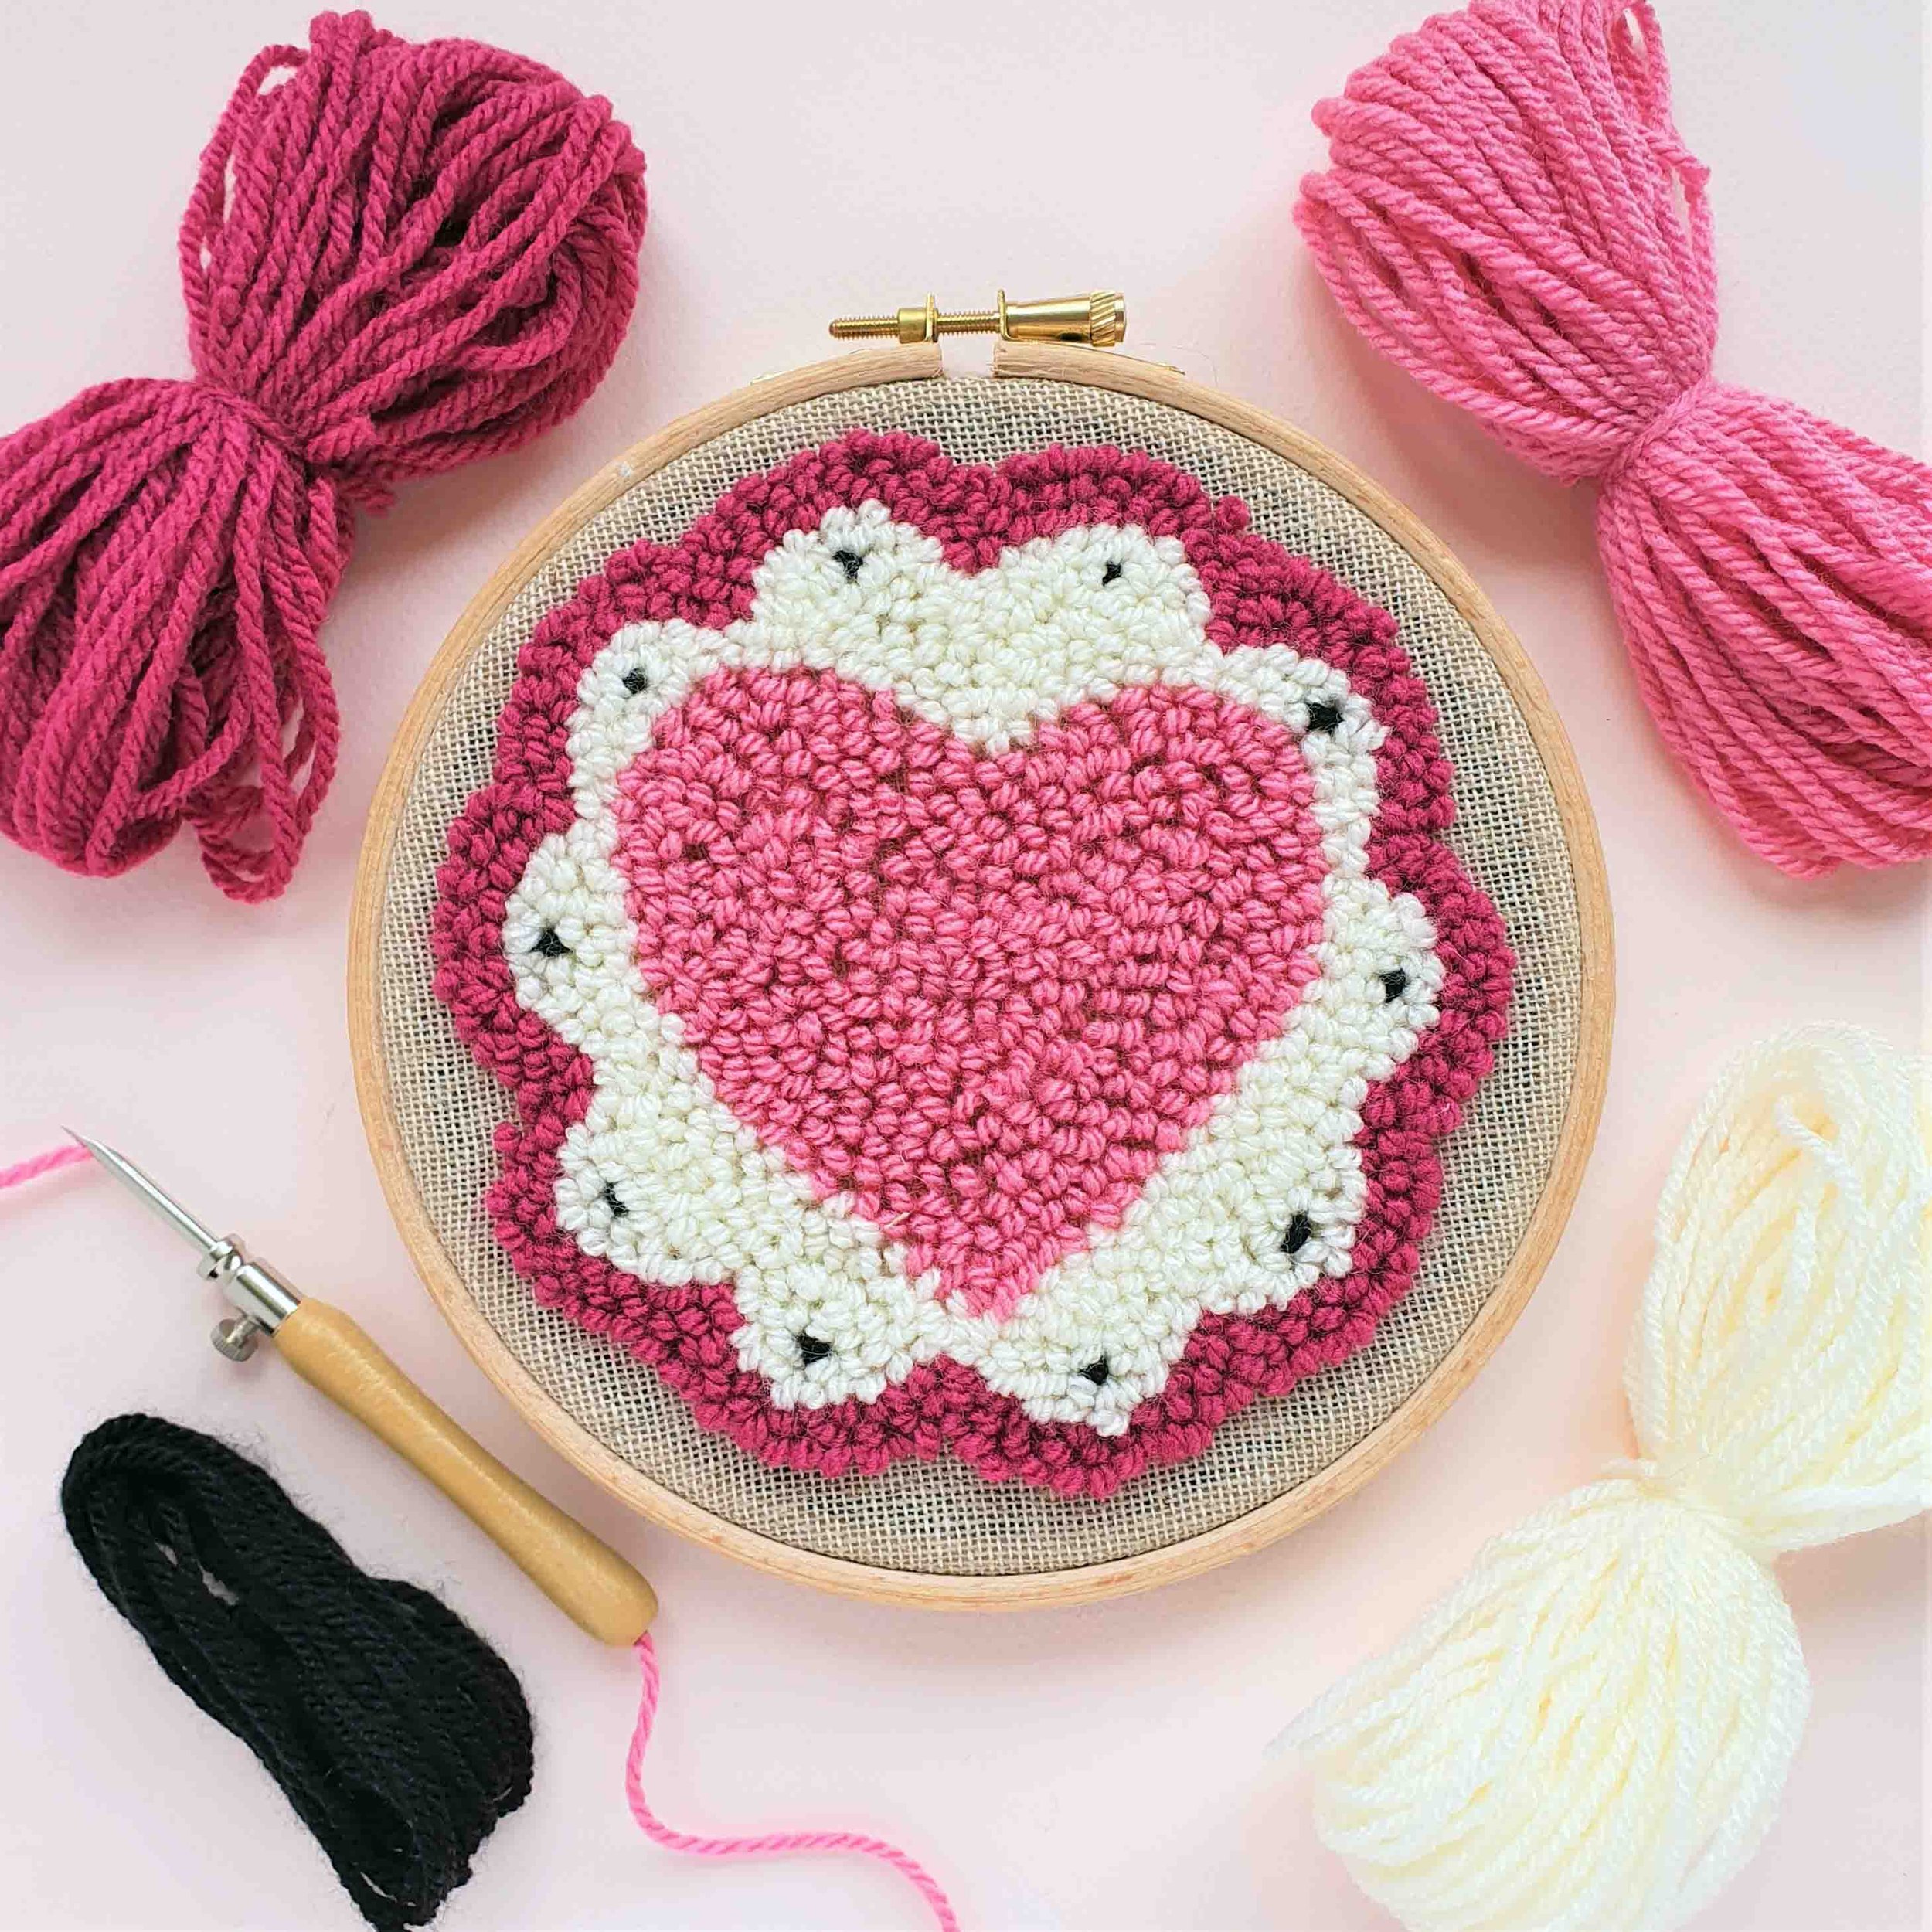 Punch needle embroidery: Cute, cozy projects for cold nights